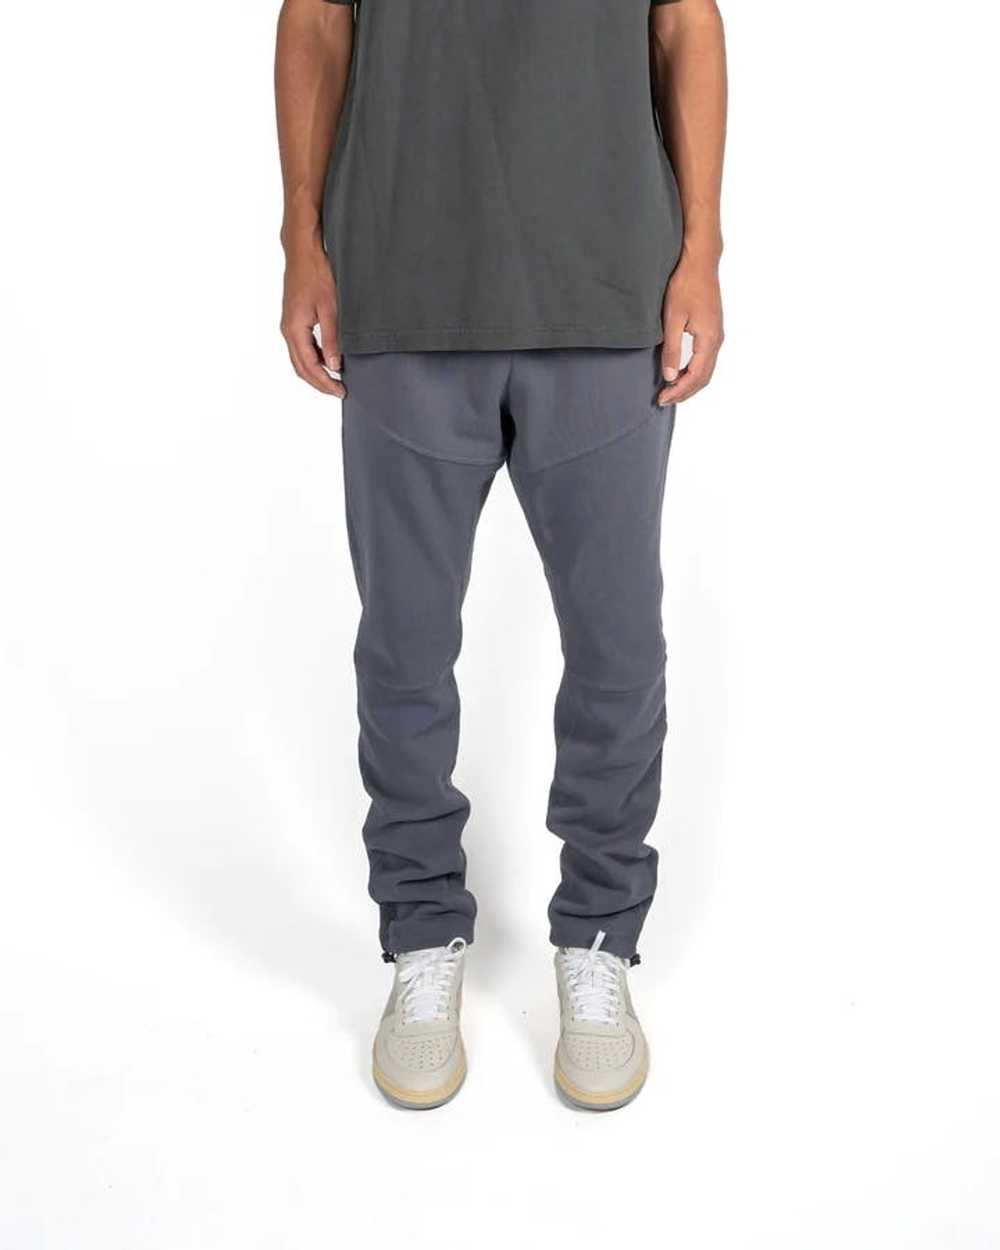 Richie Le Collection Corded Daily Sweatpants - image 9